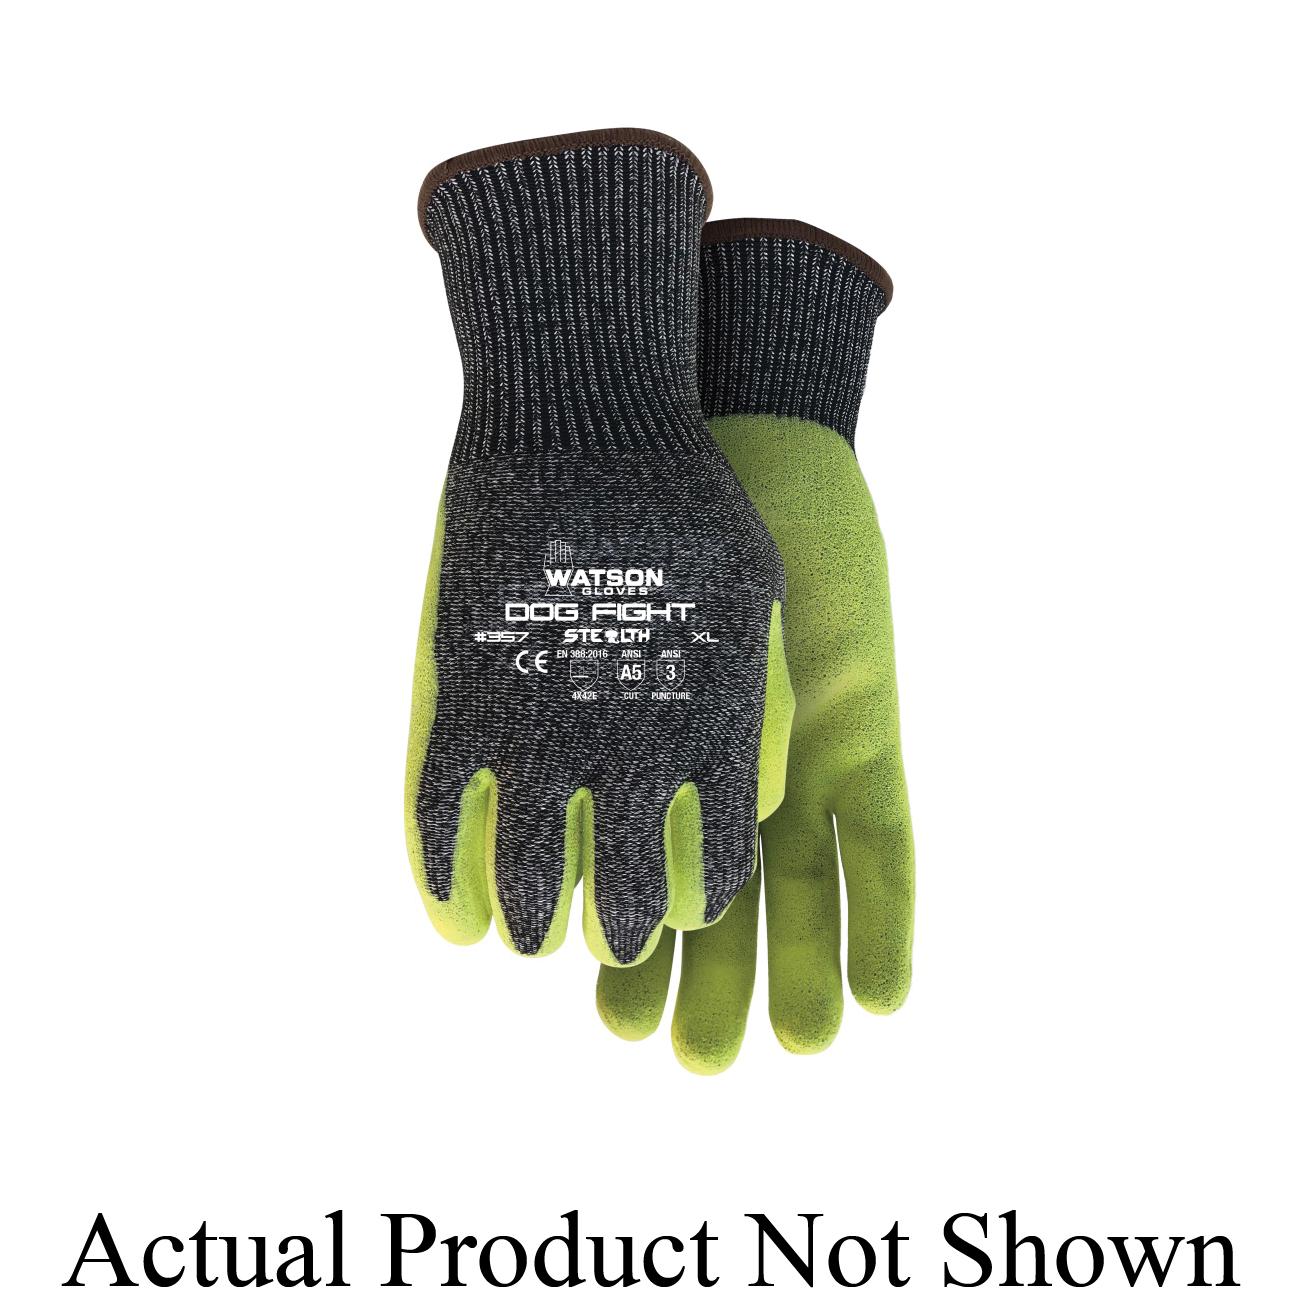 Stealth 357-XL Dog Fight General Purpose Gloves, Coated, Open Back/Straight Thumb/Seamless Style, XL, HPPE Shell Palm, Dyneema®/HPPE, Gray/Hi-Viz Yellow, Knit Wrist Cuff, Nitrile Coating, Resists: Abrasion, Blade Cut, Puncture and Tear